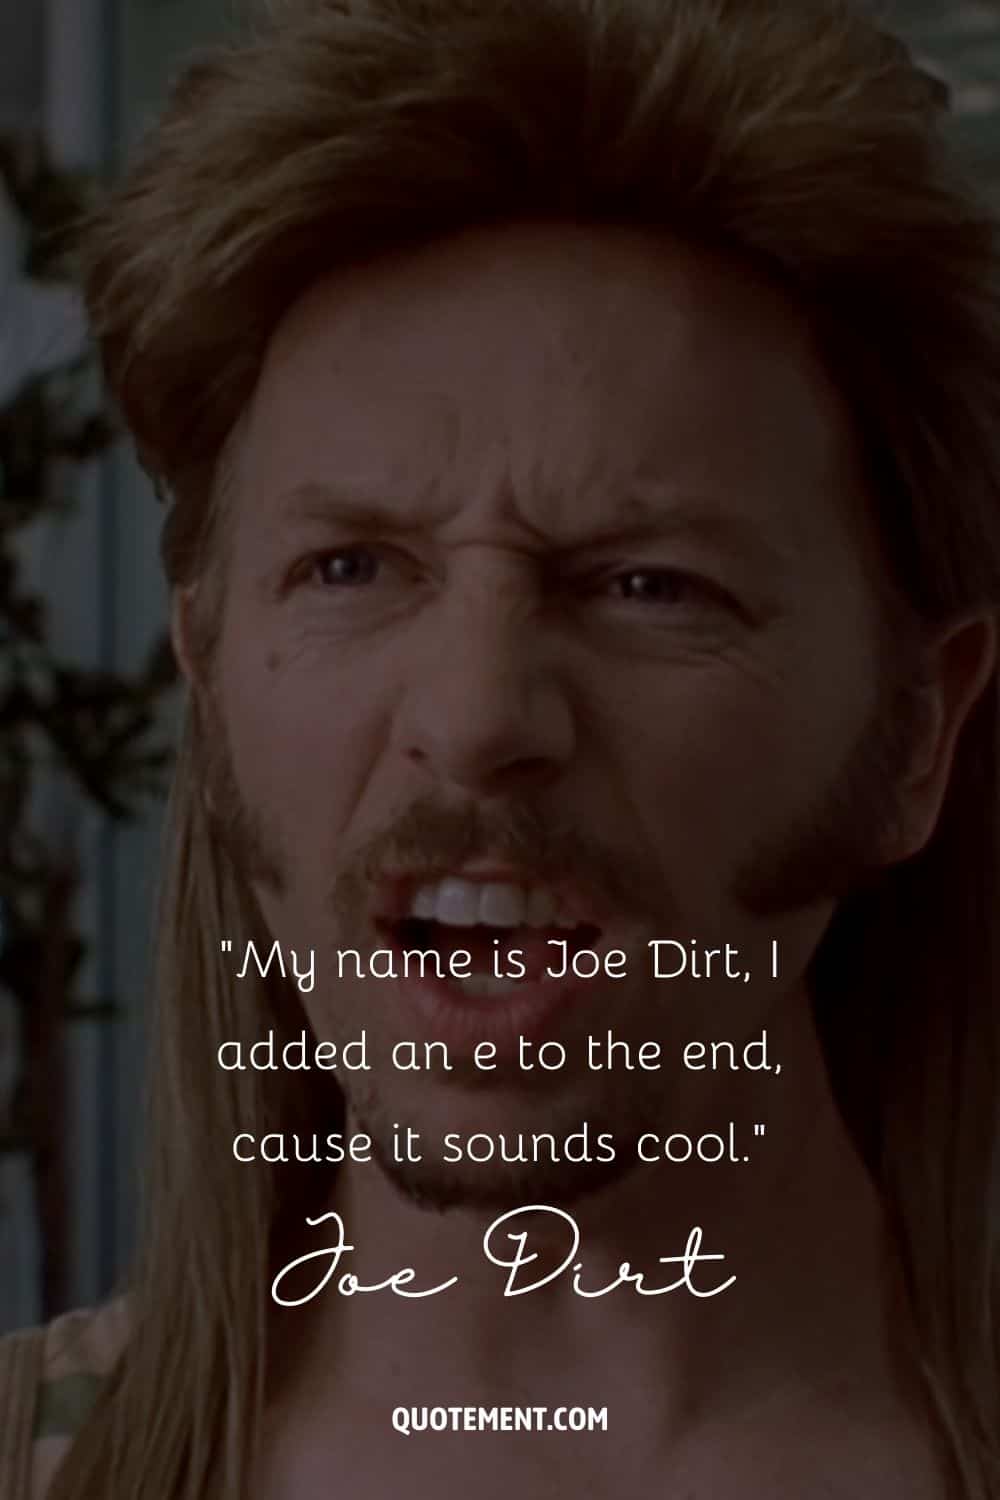 David Spade's iconic mullet-wearing character.